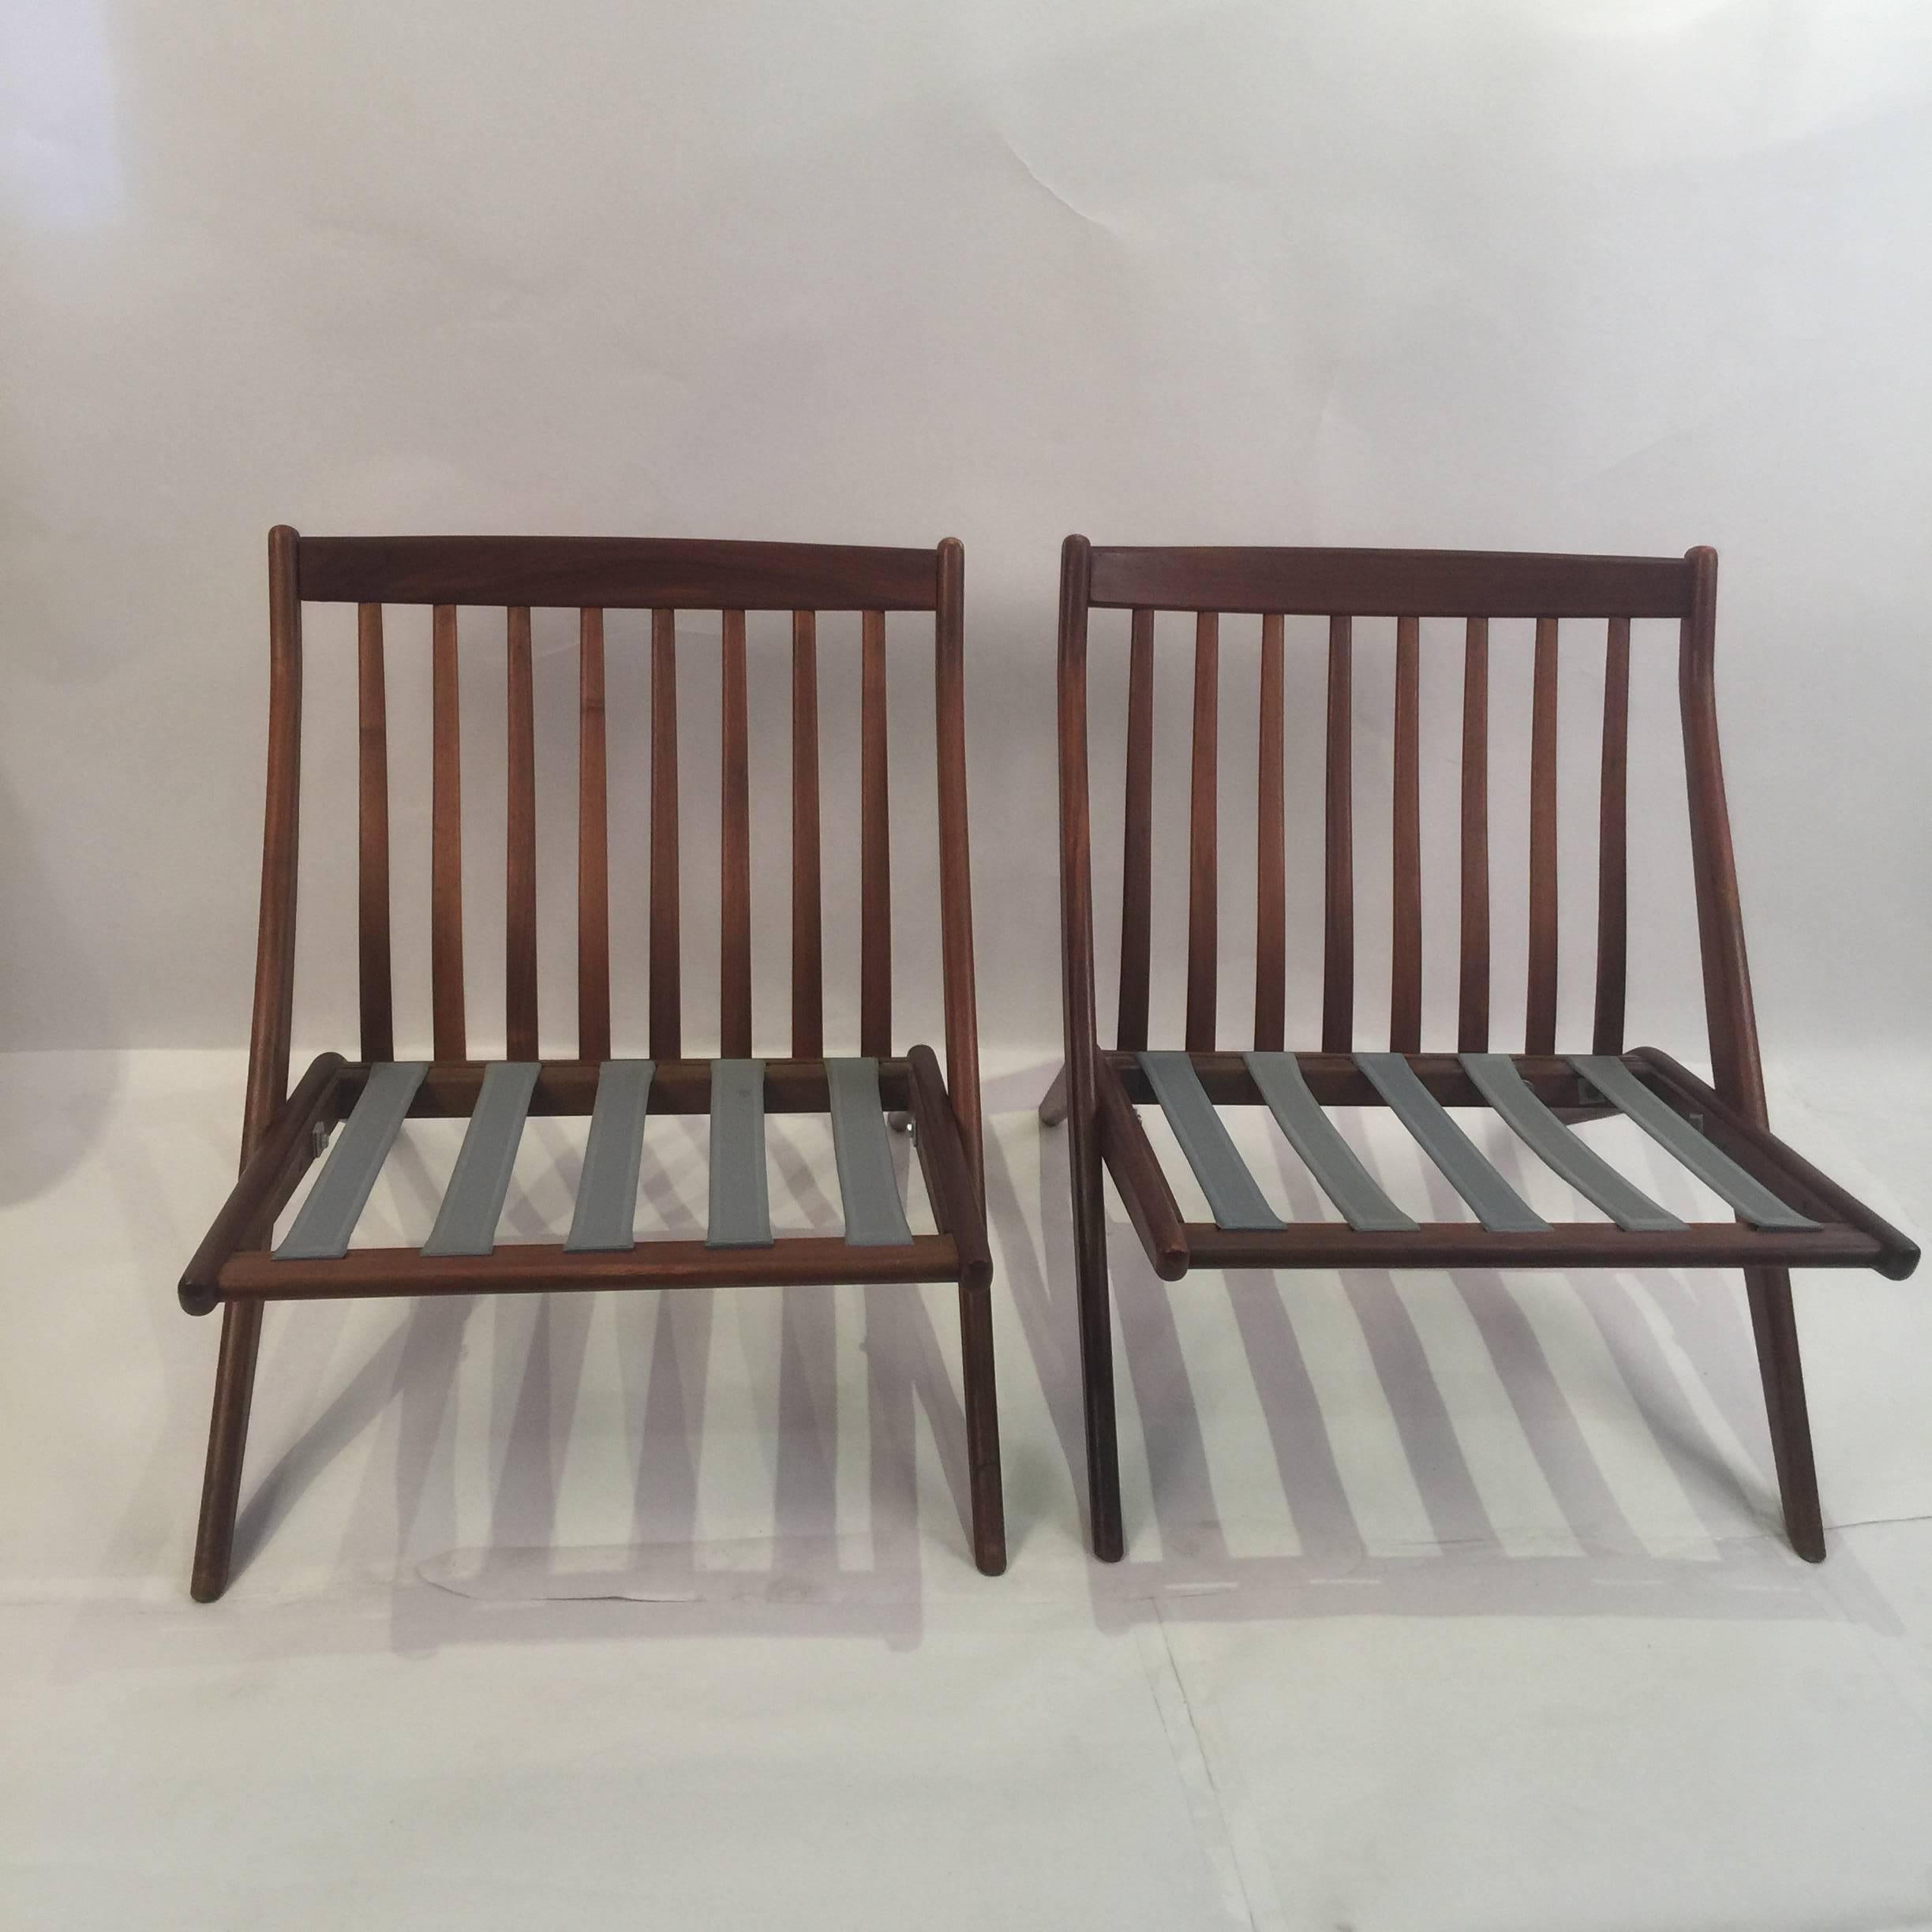 Pair of excellent teak scissor chairs made in Sweden by renown Danish designer Folke Olhsson and manufactured by DUX during the 1950s. Frames only, contact us for cushions and reupholstery.
  